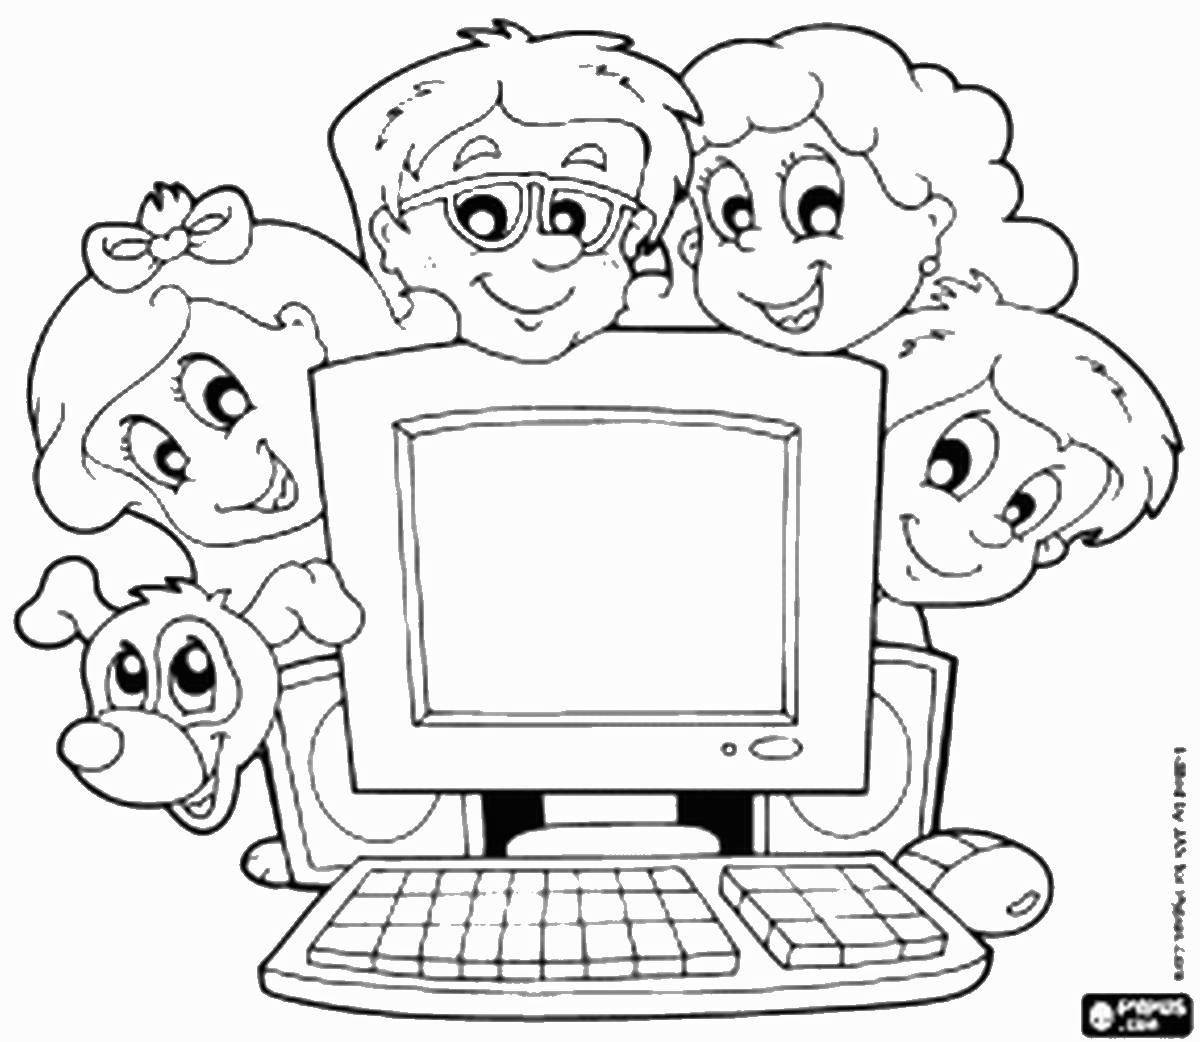 Attractive safe online coloring pages for kids